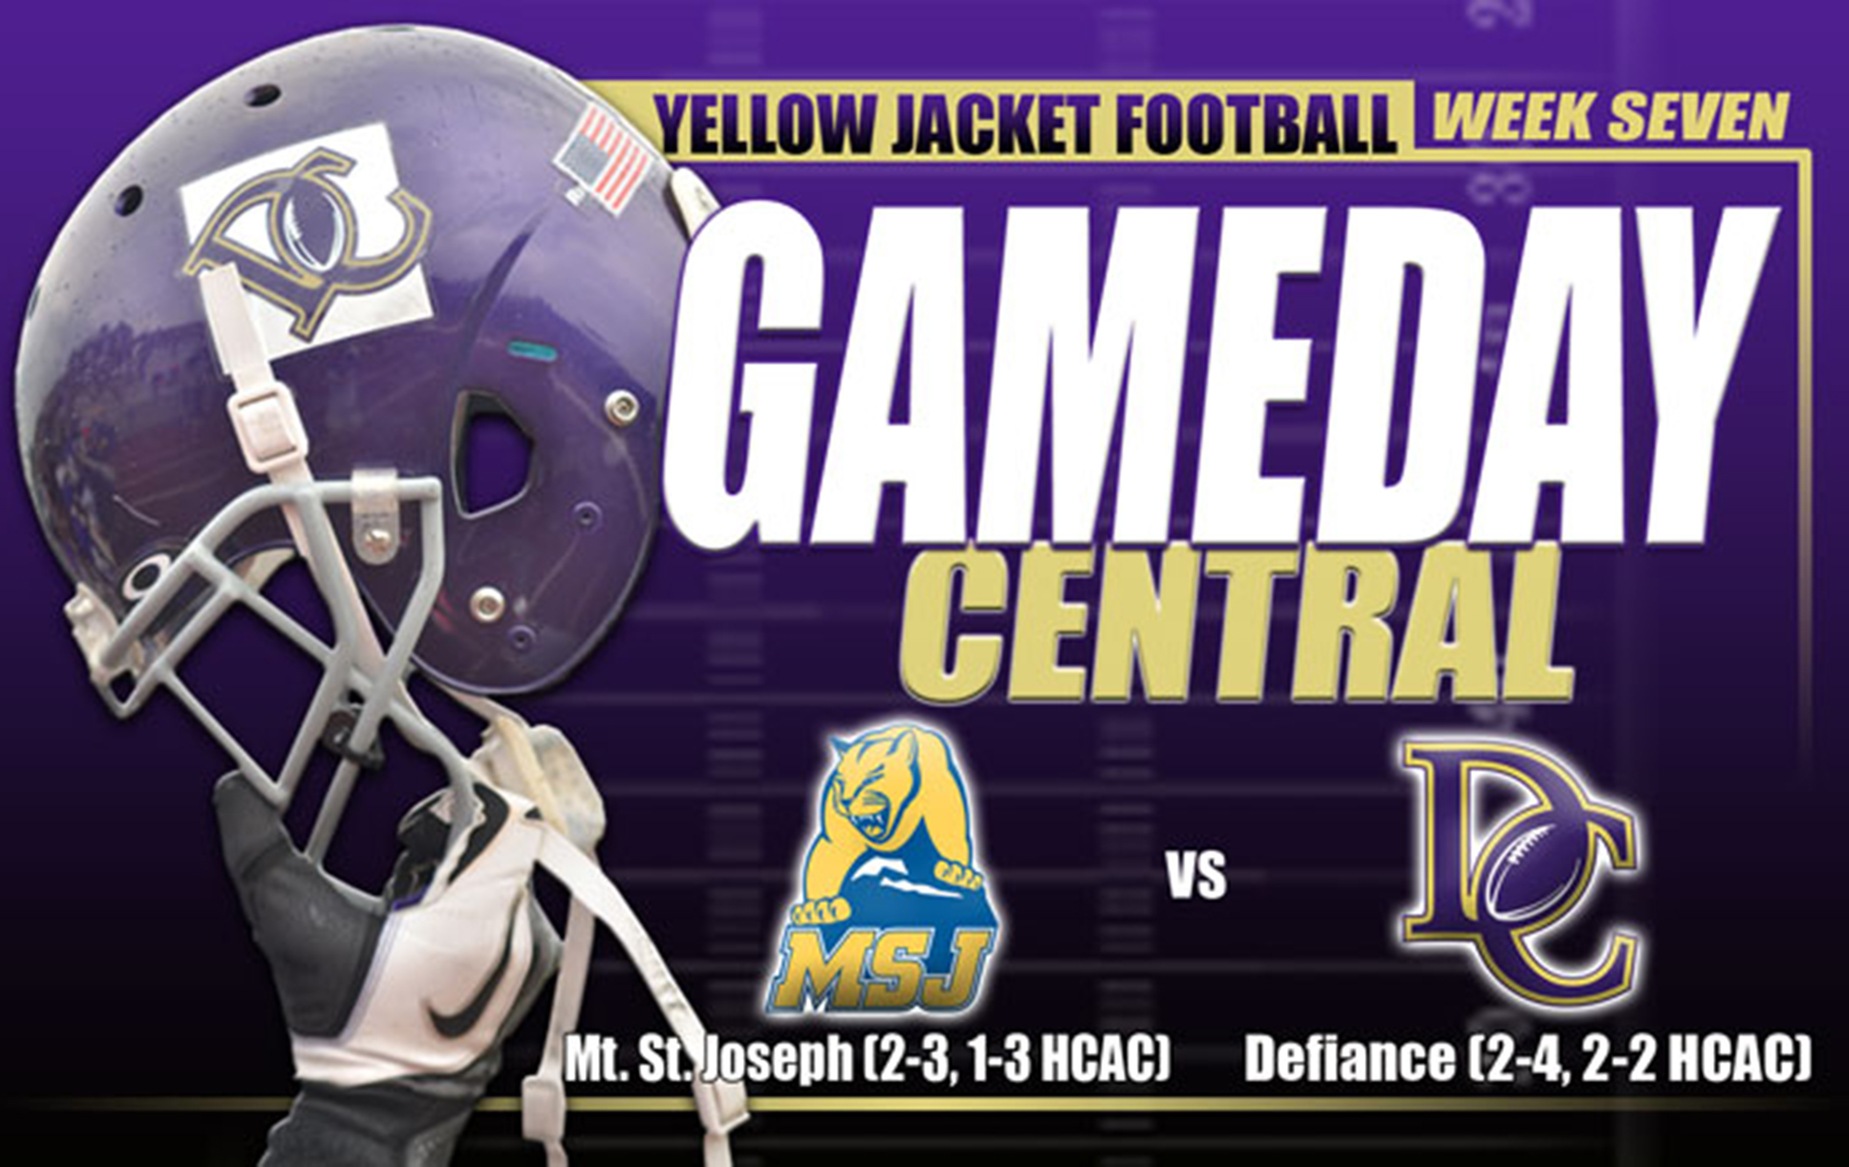 GAMEDAY CENTRAL - Defiance at Mt. St. Joseph - Game Seven